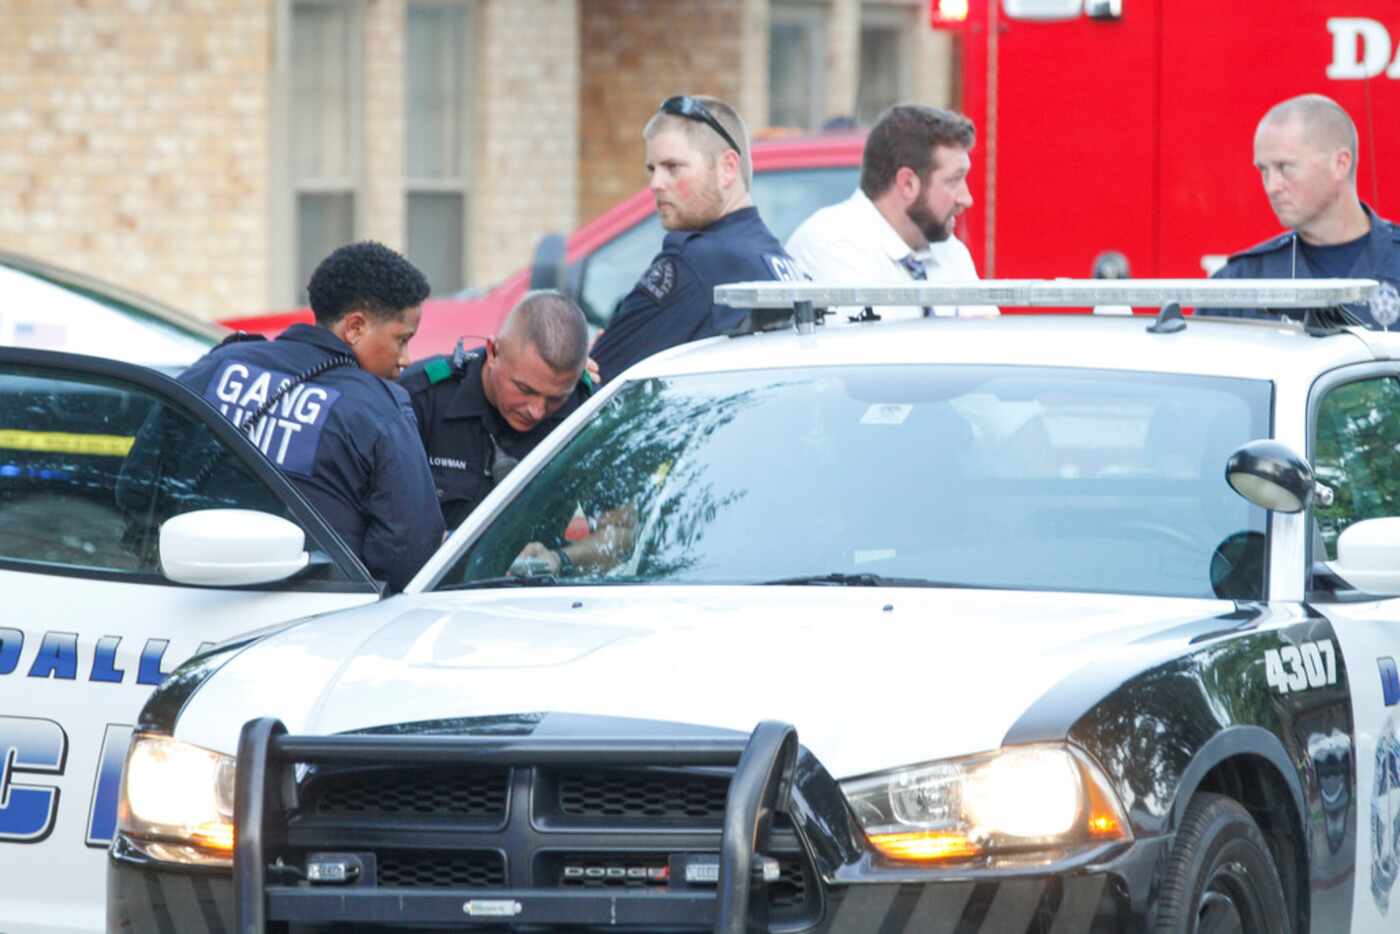 Members of Dallas Police Department gang unit spoke to a person in a squad car at the...